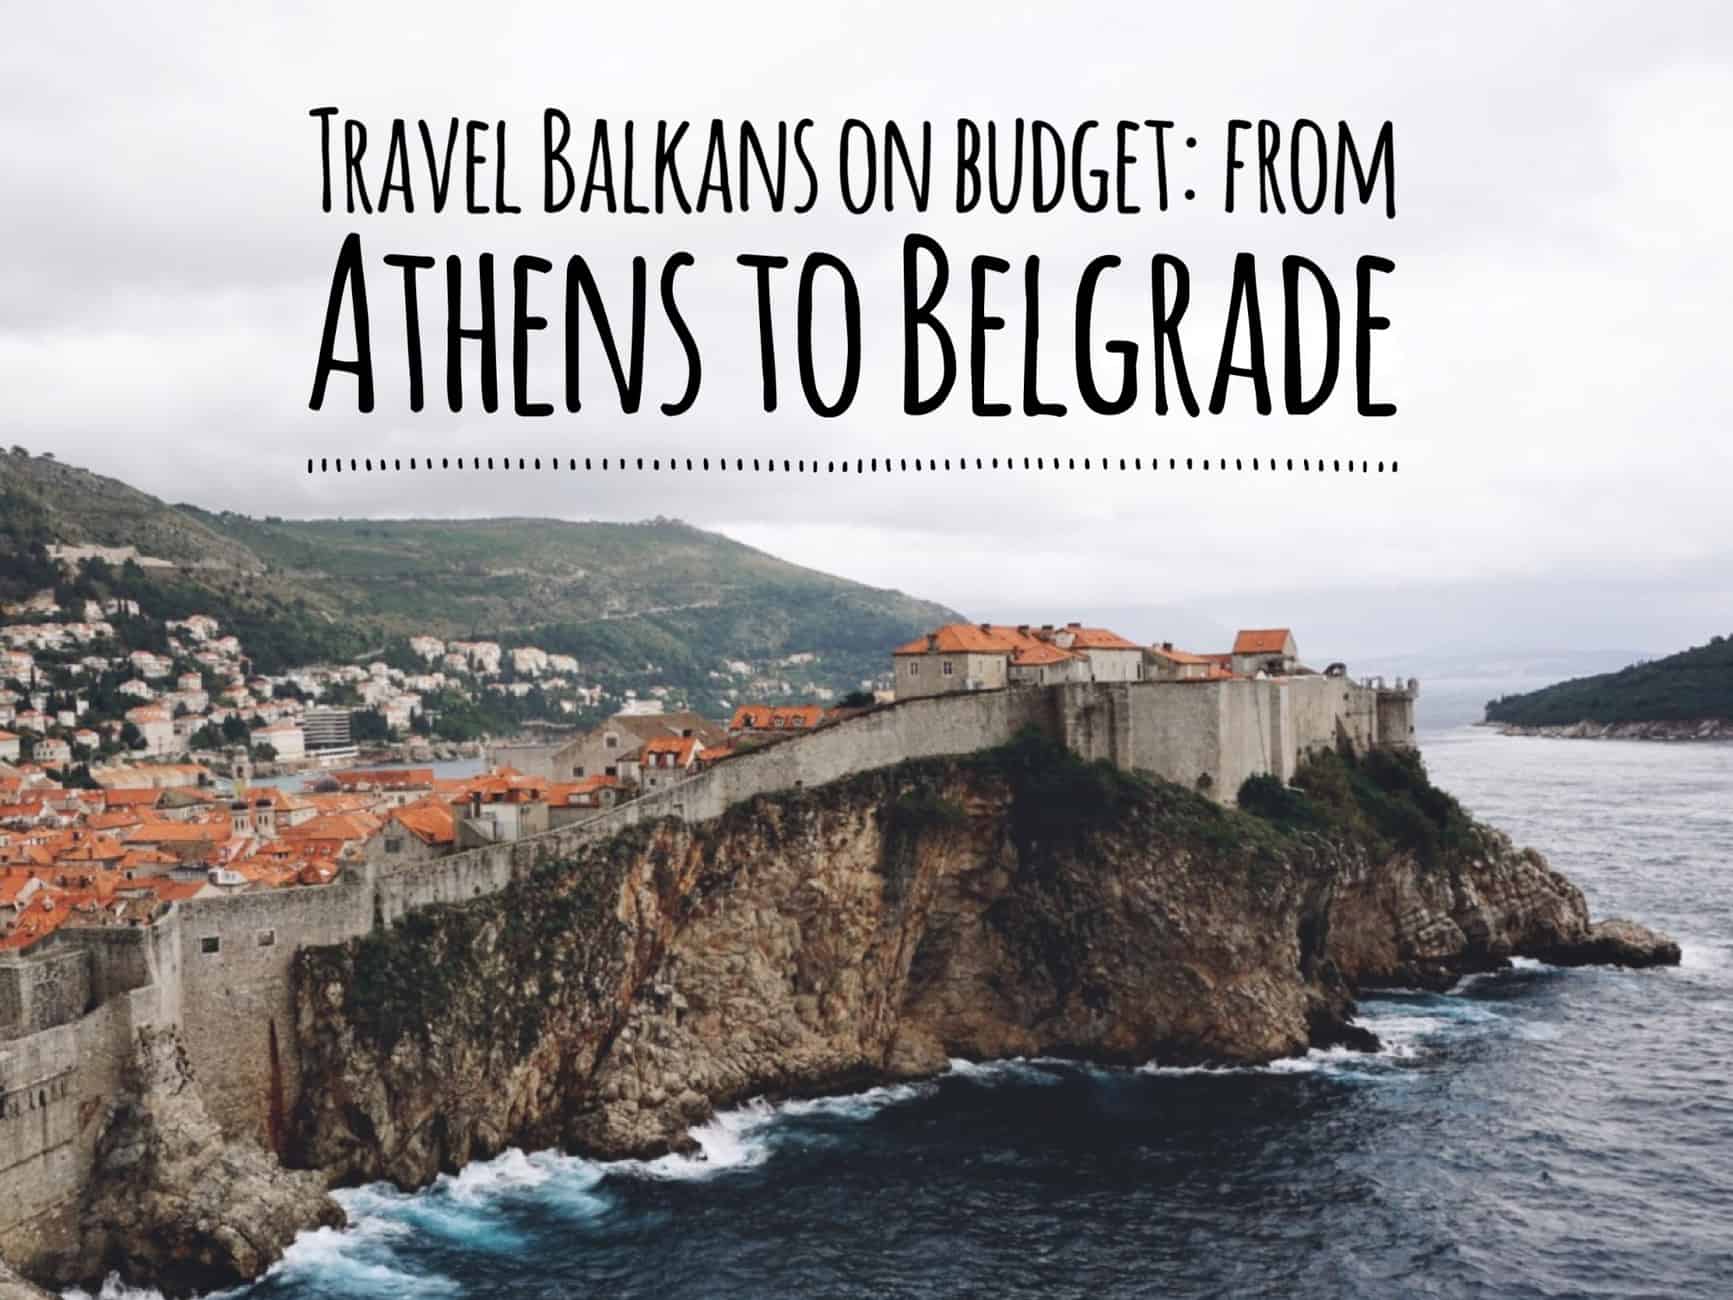 Balkans Travel Itinerary For 1 Week: From Greece To Serbia (6 Countries)